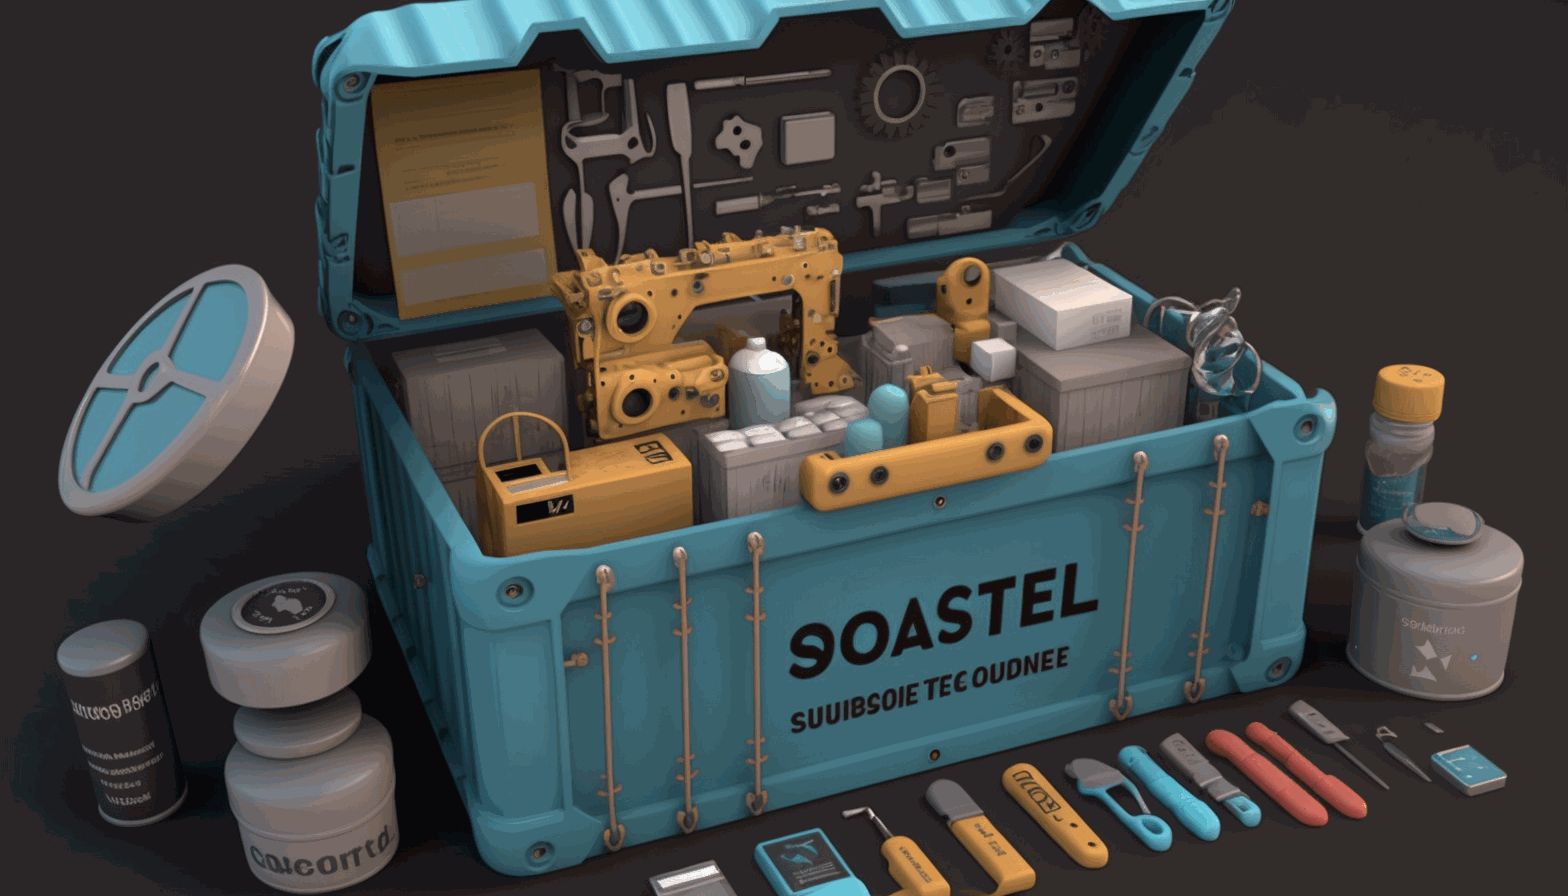 A 3D animated image of a secure, well-organized container with the Docker logo on it, surrounded by various tools and equipment related to software engineering and DevOps.